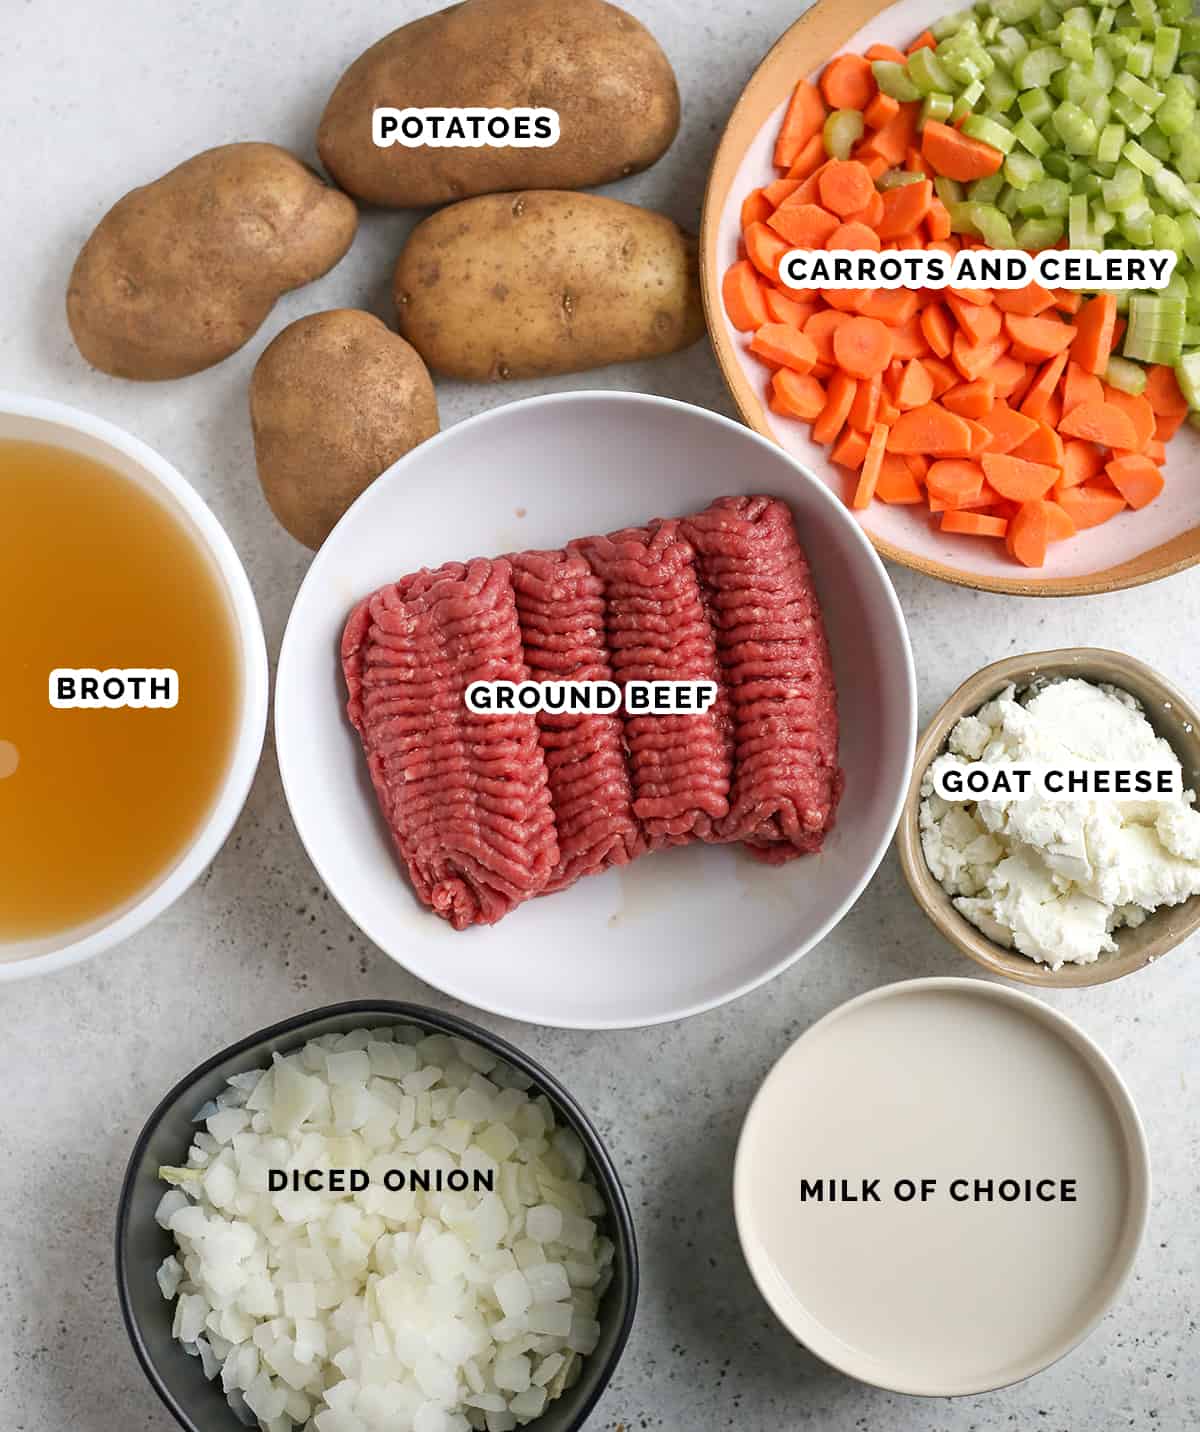 All the ingredients of cheeseburger soup in individual bowls- ground beef, broth, onion, milk, got cheese, carrots, celery and potatoes.  